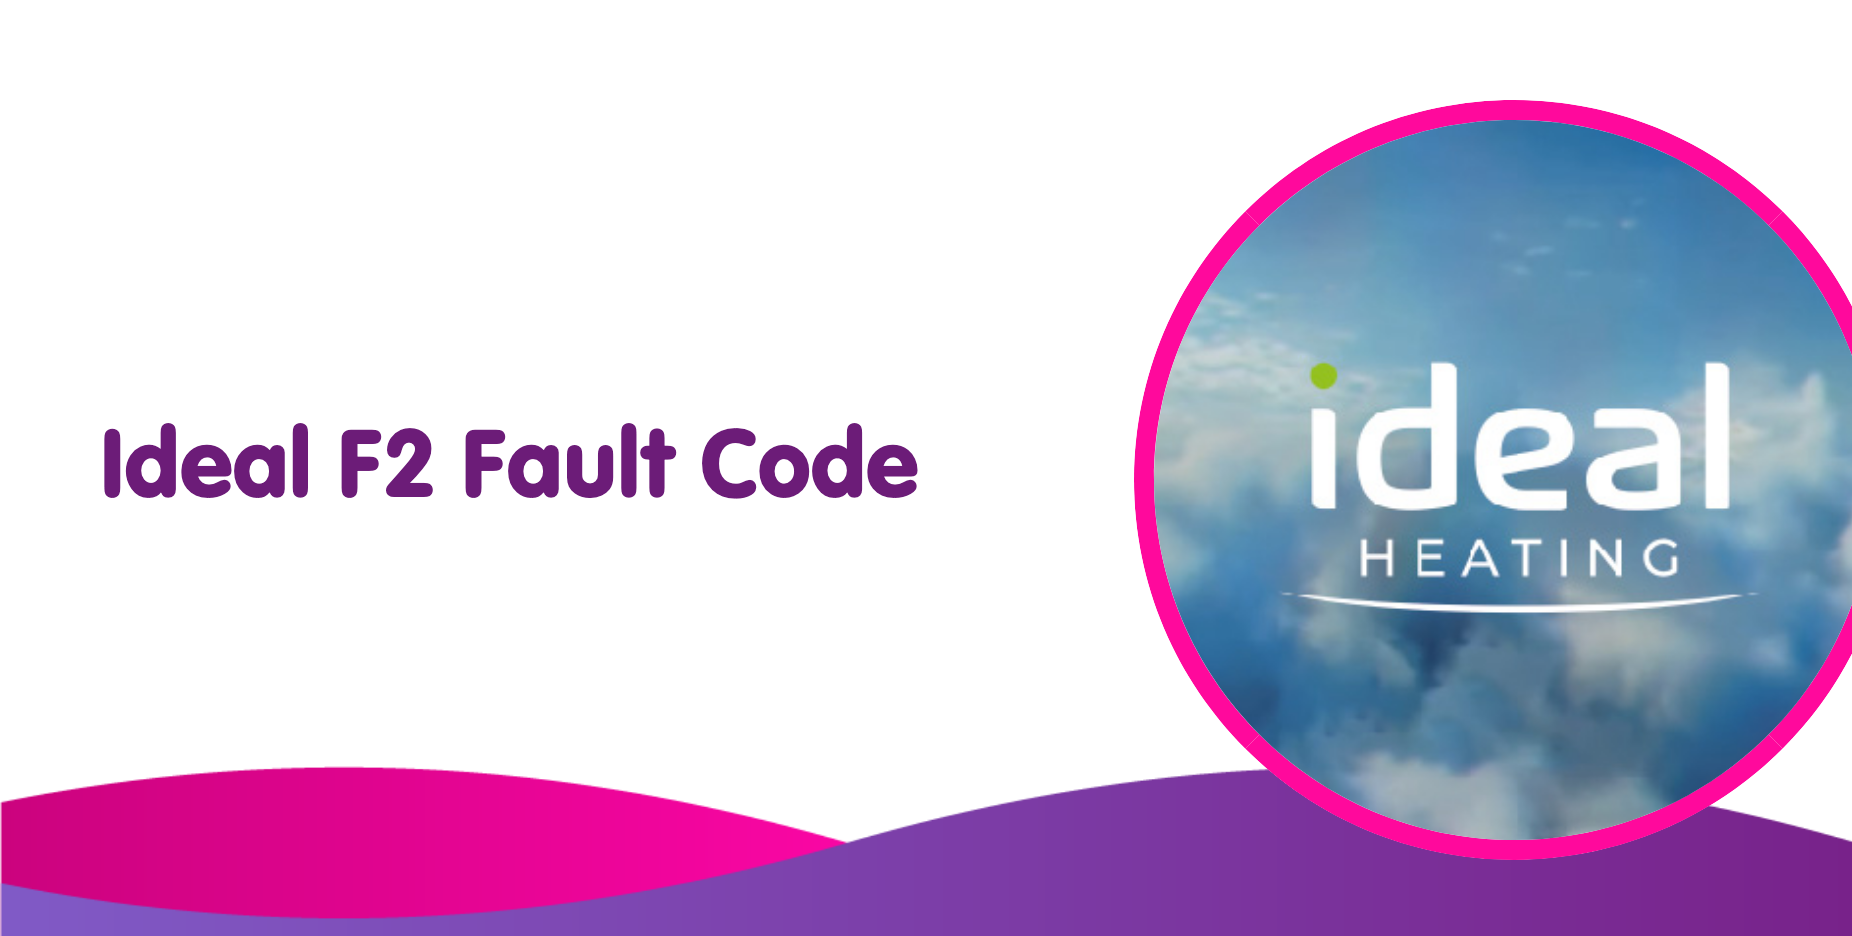 Ideal F2 Fault Code Meaning, Causes & How To Fix